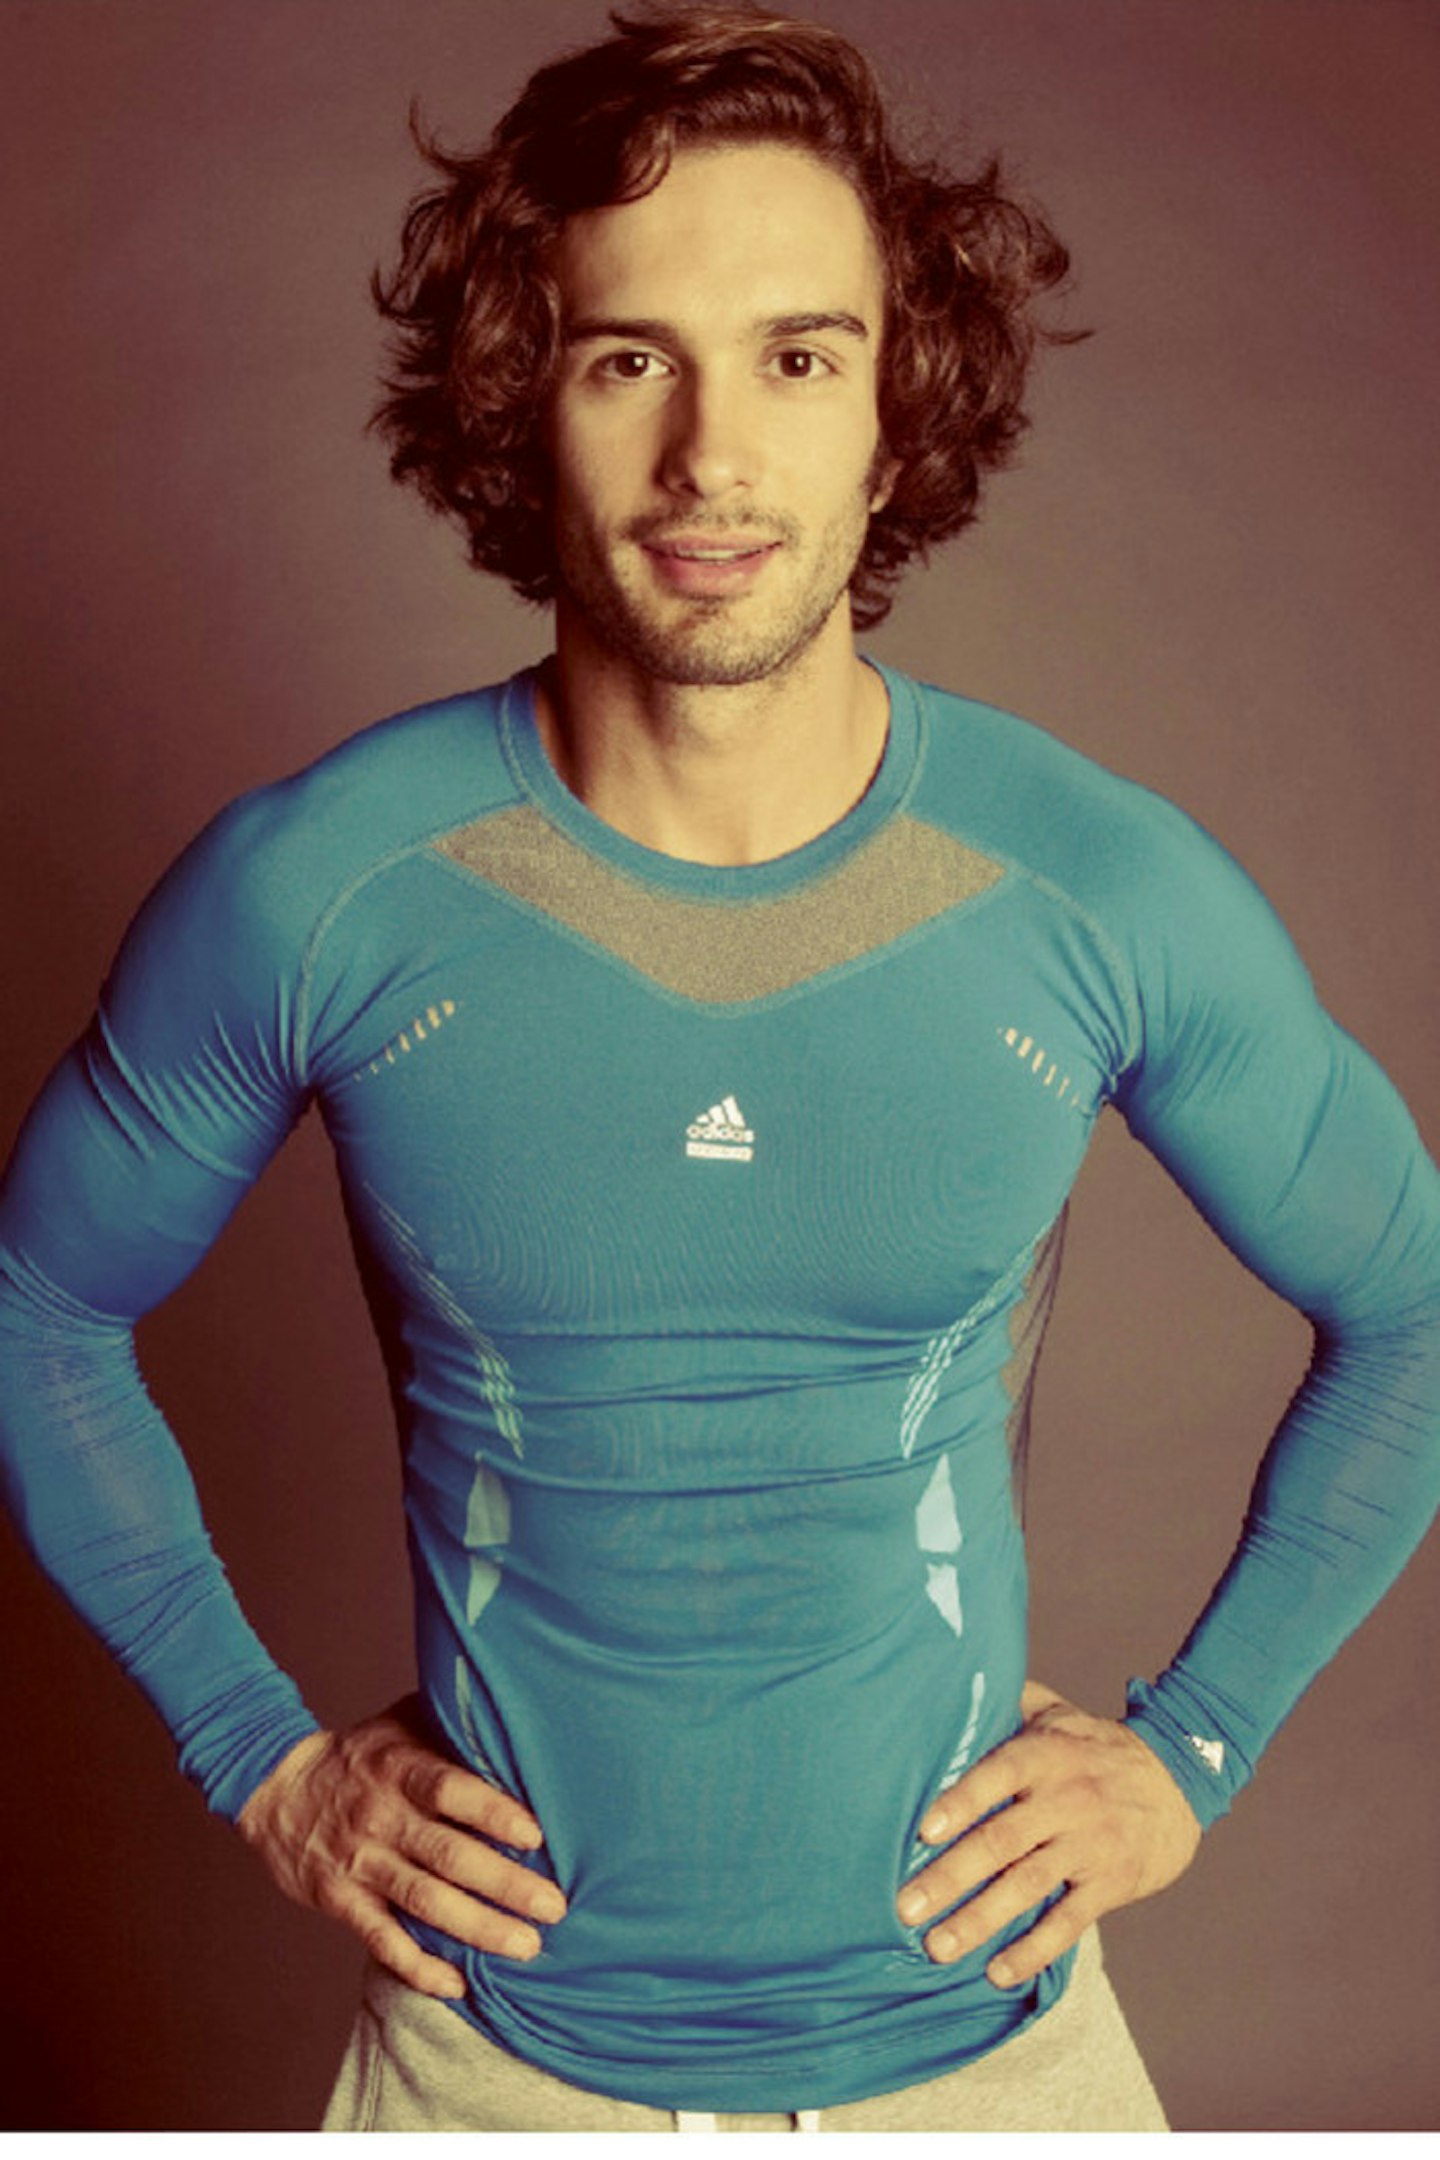 The Body Coach Plan, £147.00 for 90 days, available at http://www.thebodycoach.co.uk